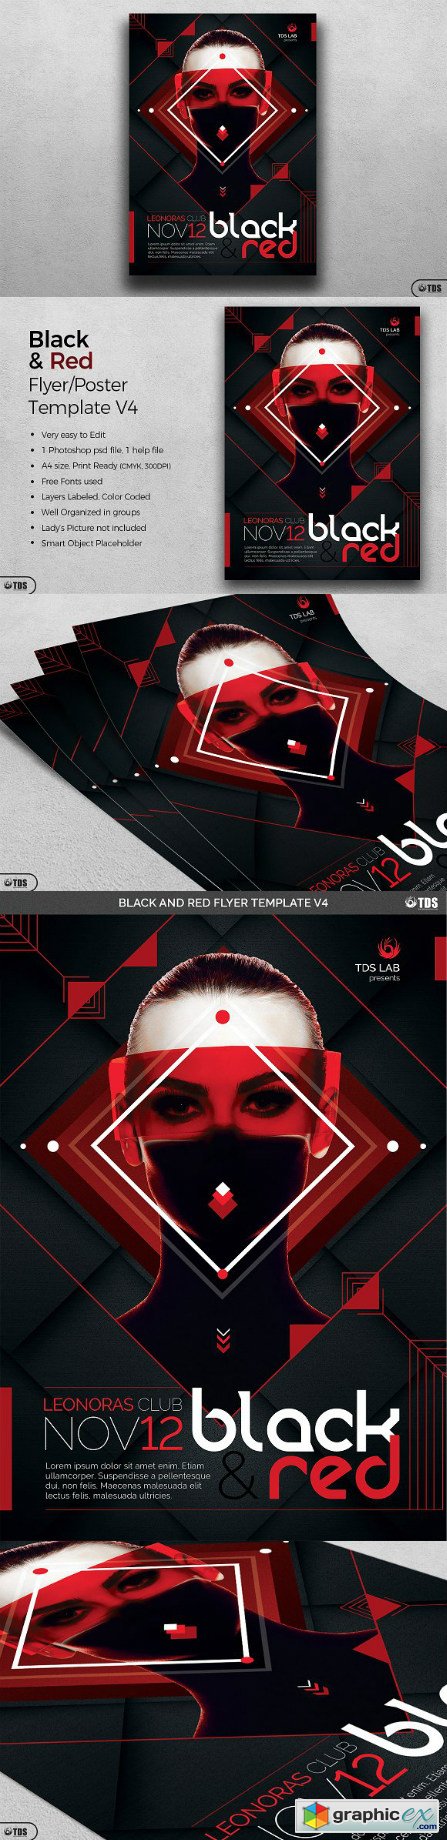 Black and Red Flyer Template V4